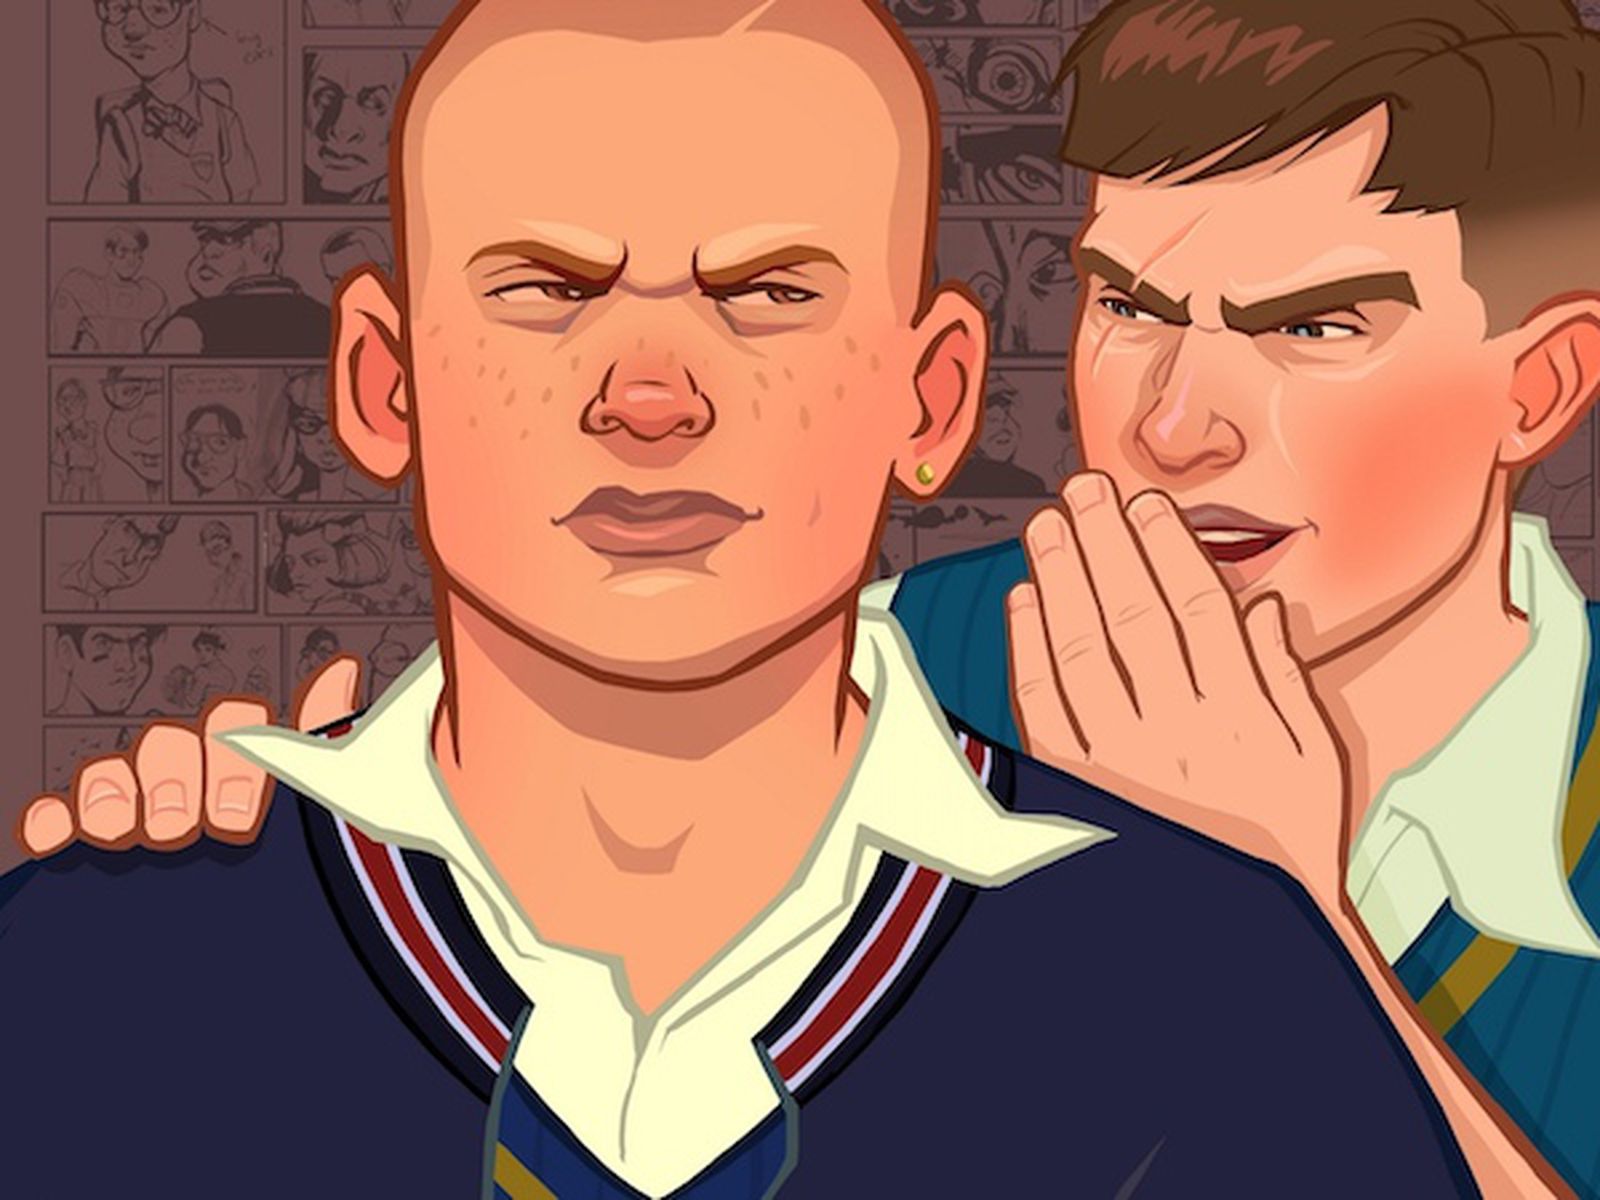 bully anniversary edition ios download free